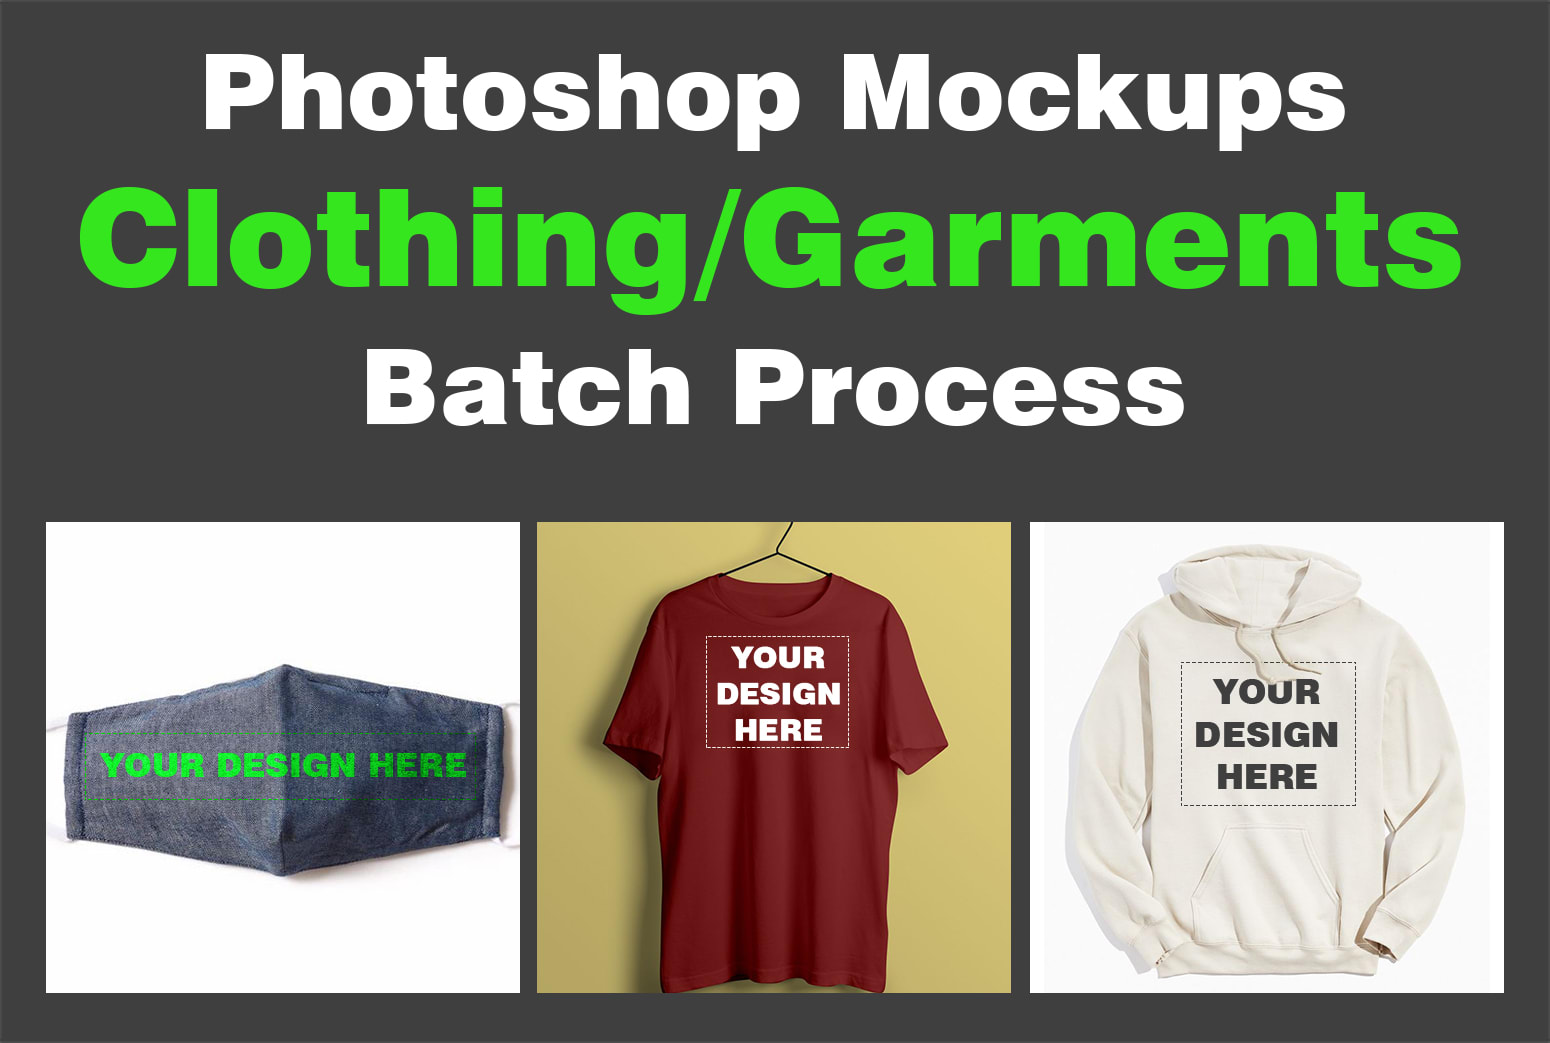 Download Batch Process Your Garments Mockups Of Photoshop By Waqas17 Fiverr